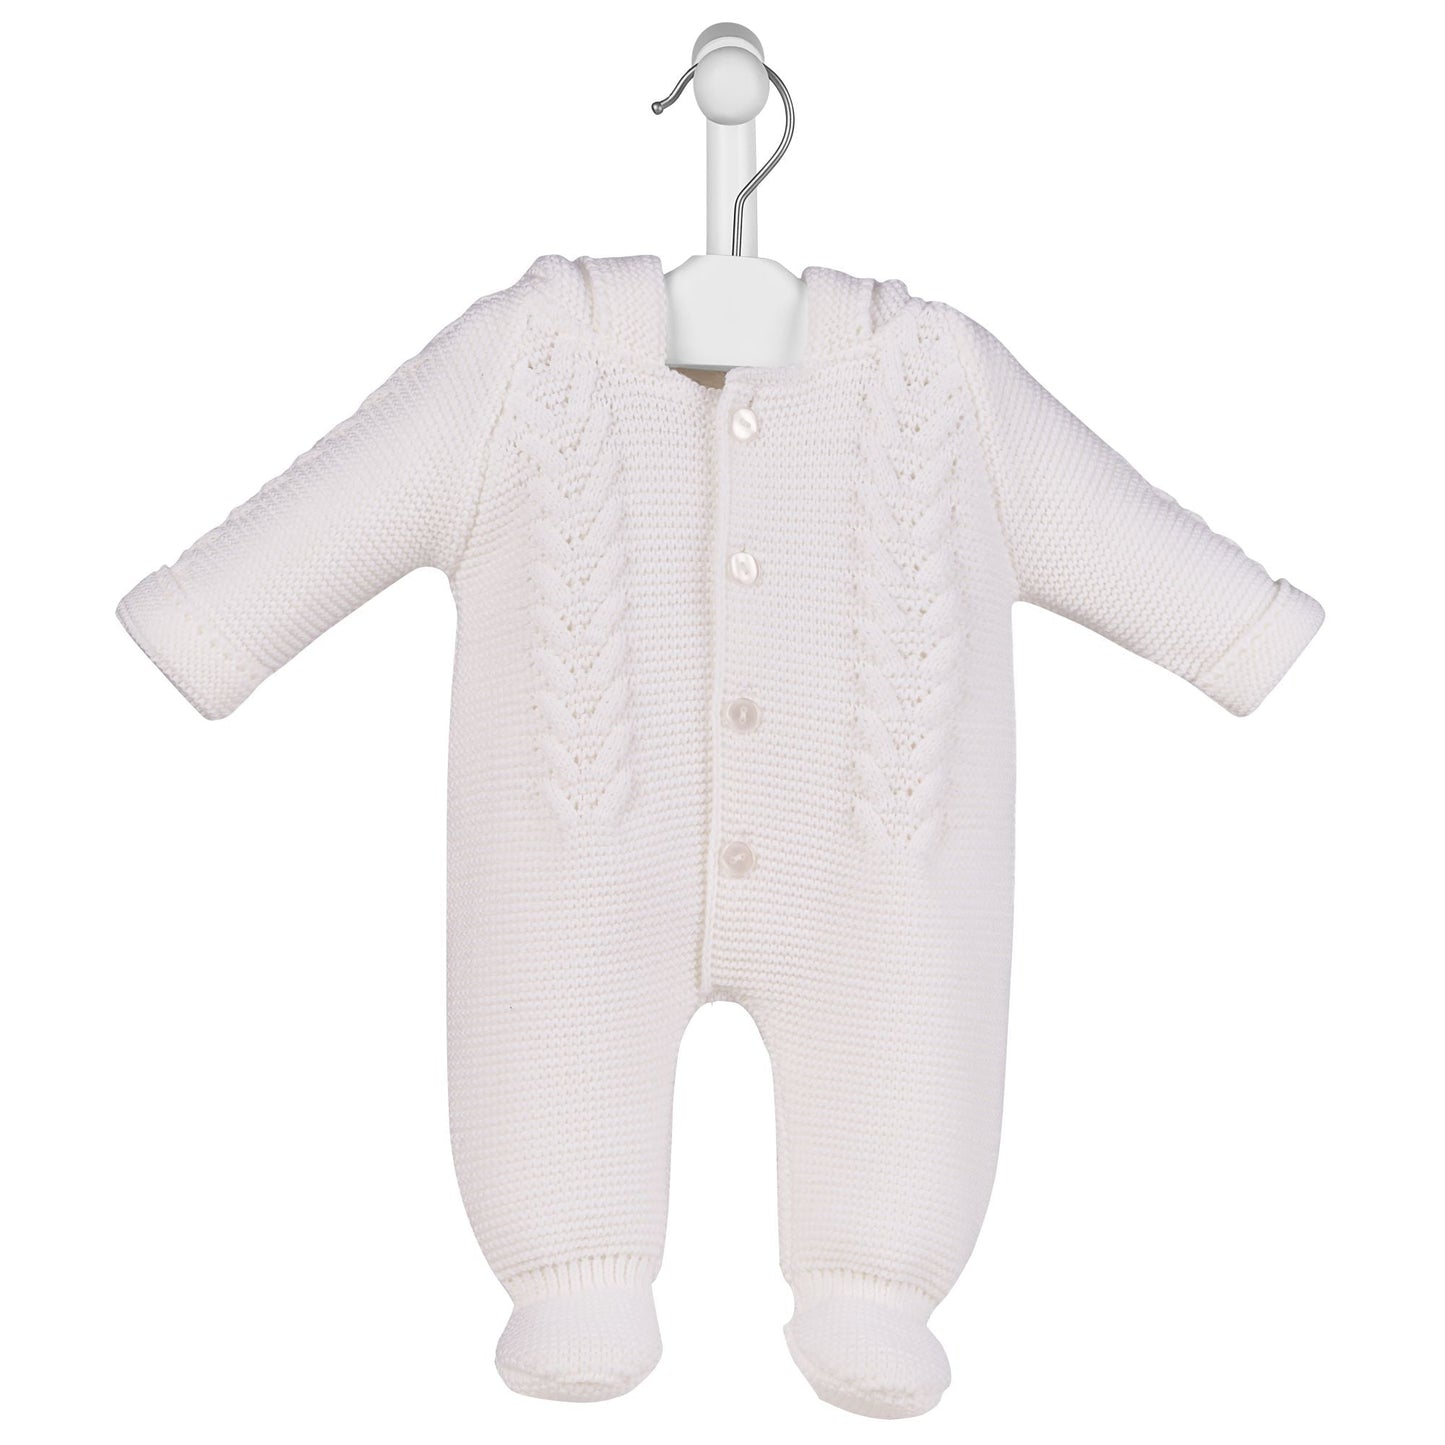 Bobble Hooded Cable Knit Pramsuit